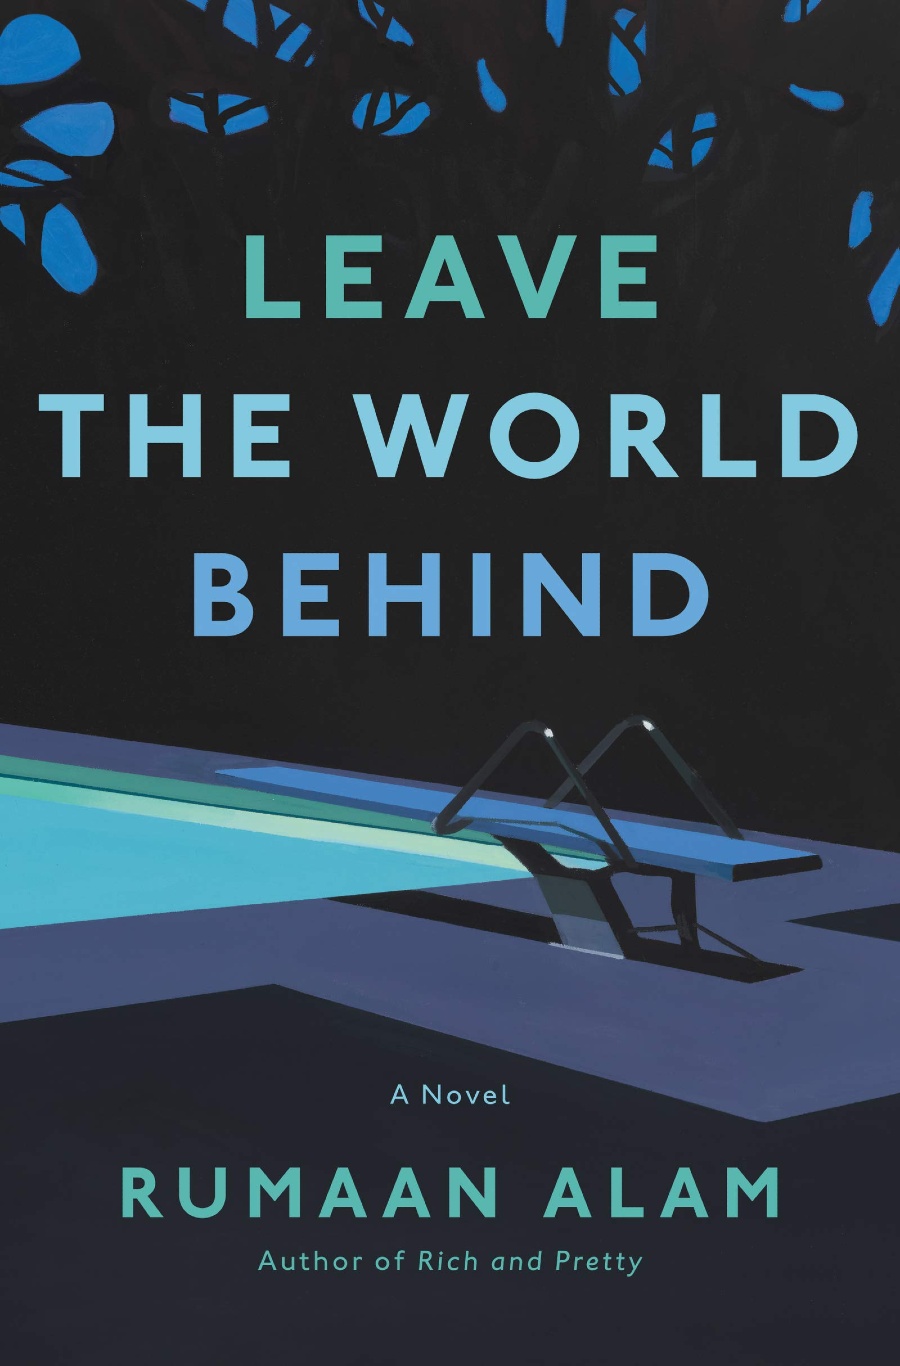 Leave the World Behind apocalyptic novel